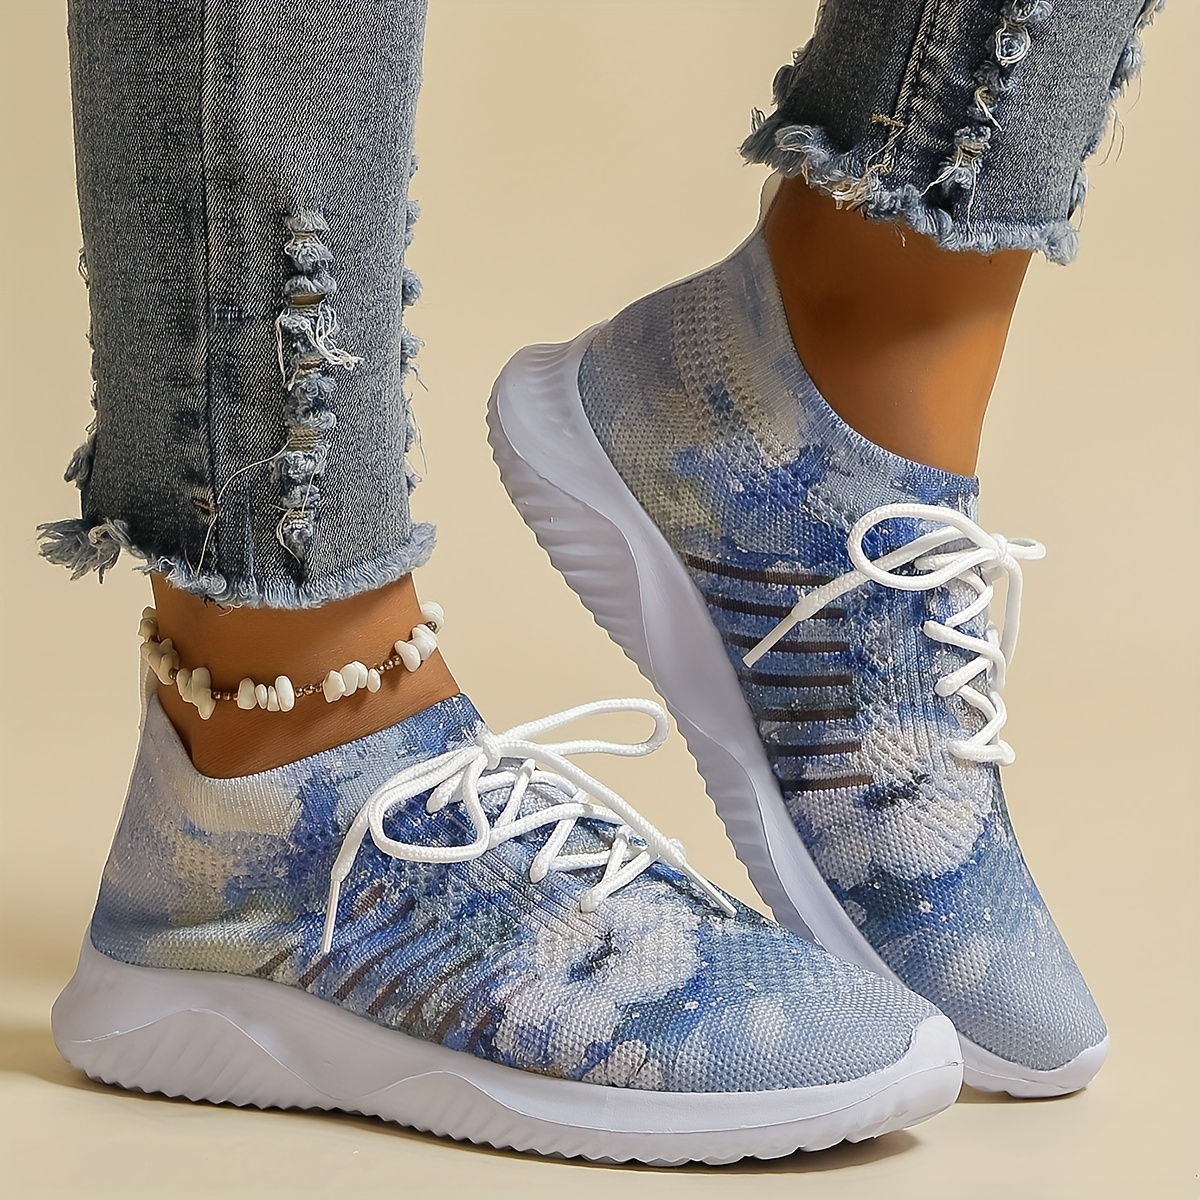 

Women's Flower Pattern Sneakers, Breathable Knit Sip On Outdoor Shoes, Comfortable Low Top Sport Shoes